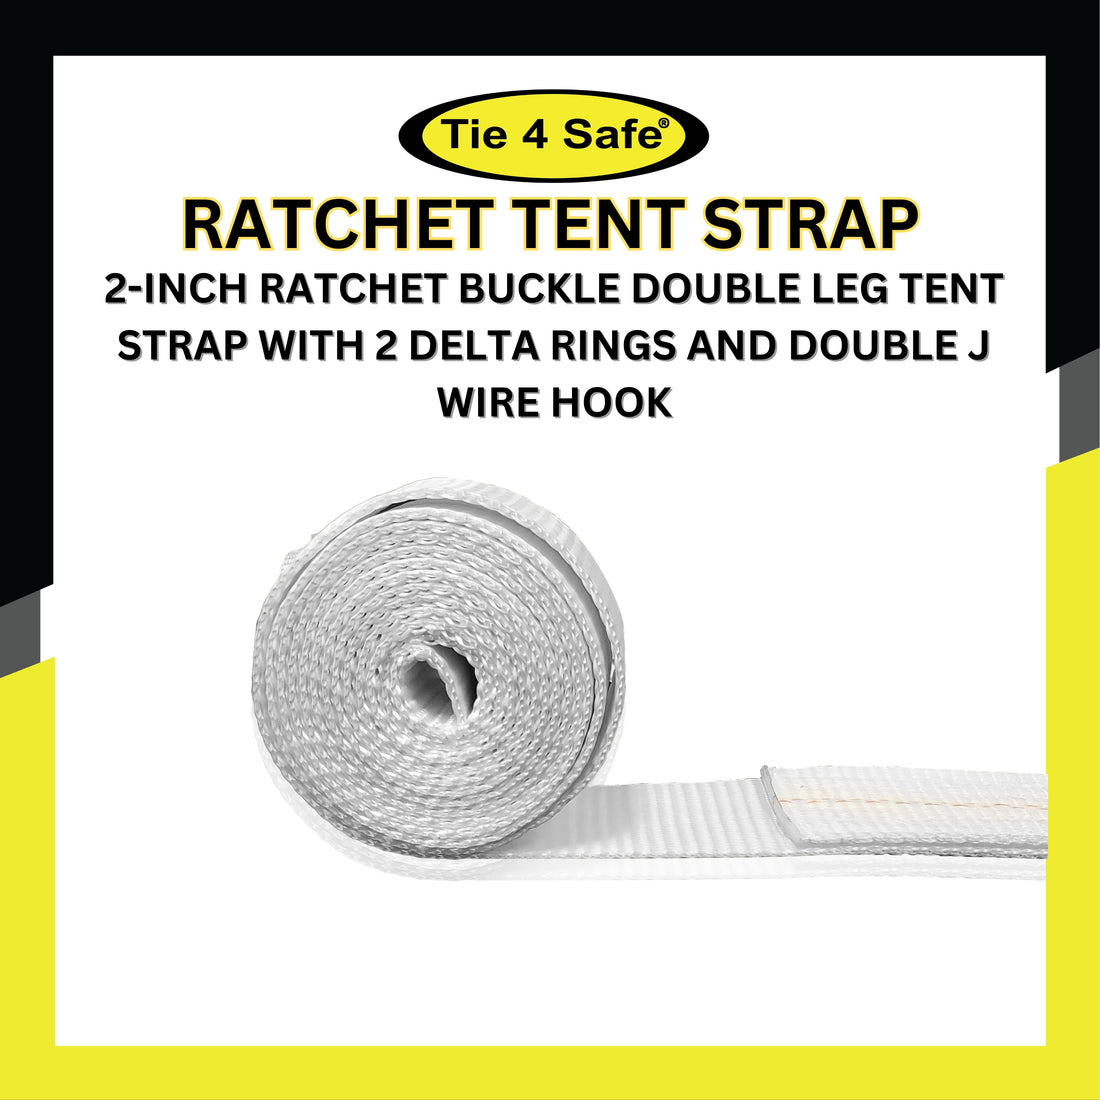 2-Inch Ratchet Buckle Double Leg Tent Strap With 2 Delta Rings And Double J Wire Hook